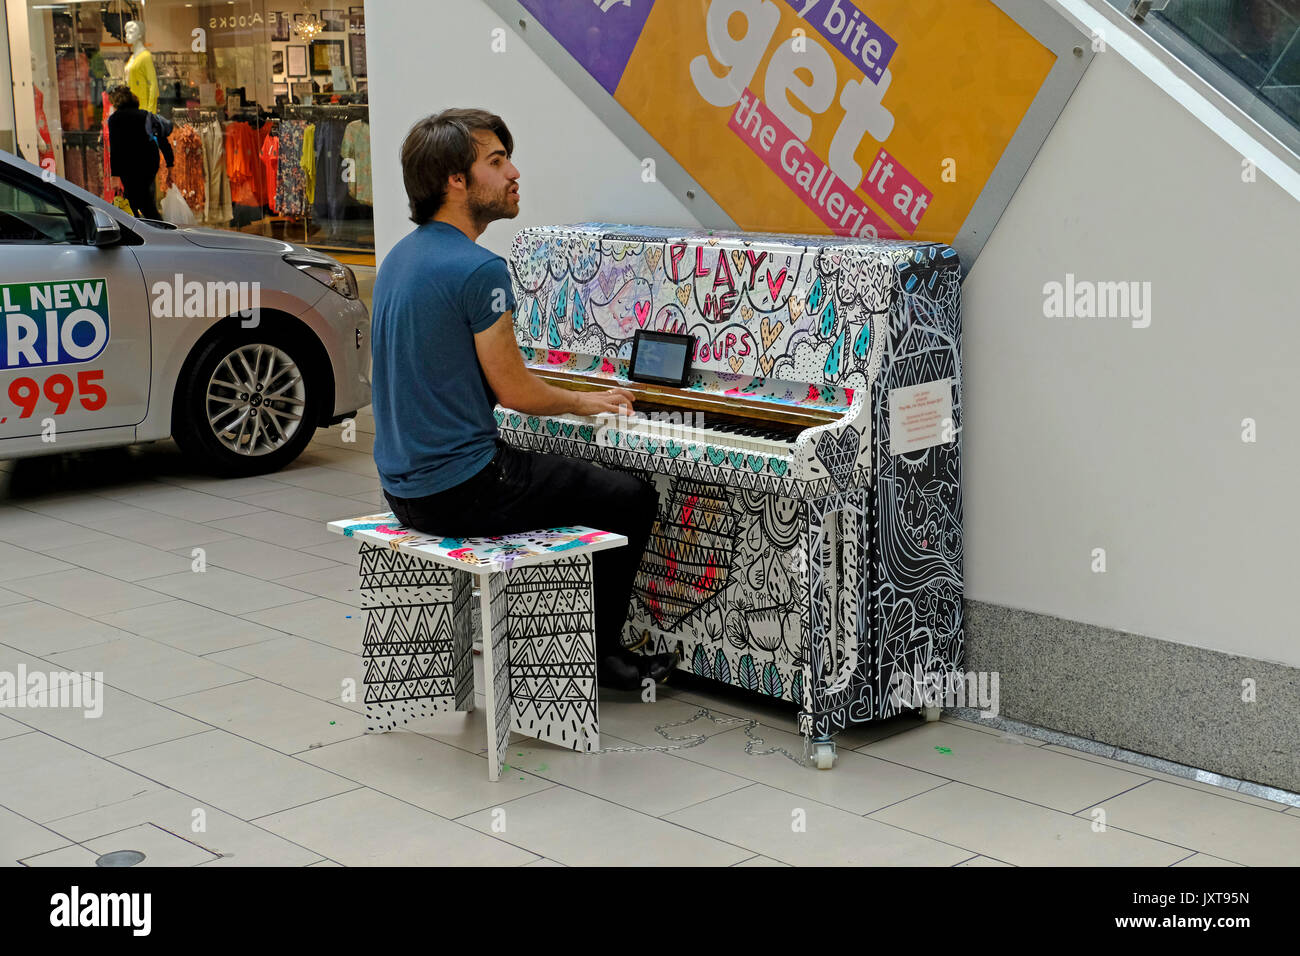 Bristol, UK. 17th August, 2017. A series of pianos appear in locations around the city for the public to play. The pianos are part of “Play Me I’m Yours”, a musical art trail devised by artist Luke Jerram, which consists of 18 instruments, each decorated by a local artist; “Play Me I’m Yours” runs from 17 August to 7 September 2017. Keith Ramsey/Alamy Live News Stock Photo